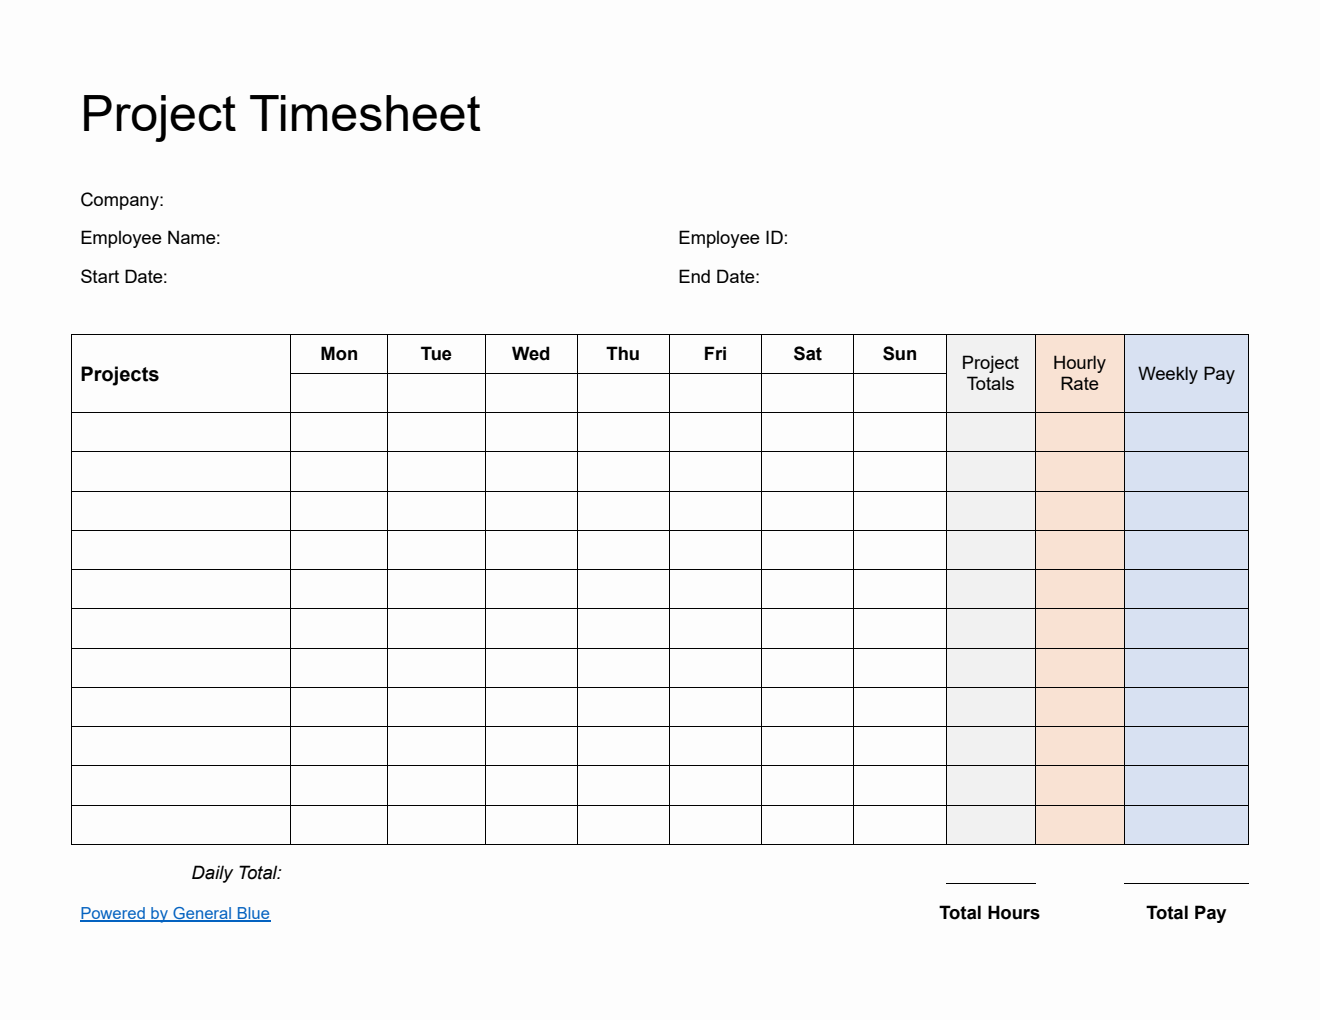 Plain Project Timesheet in Word